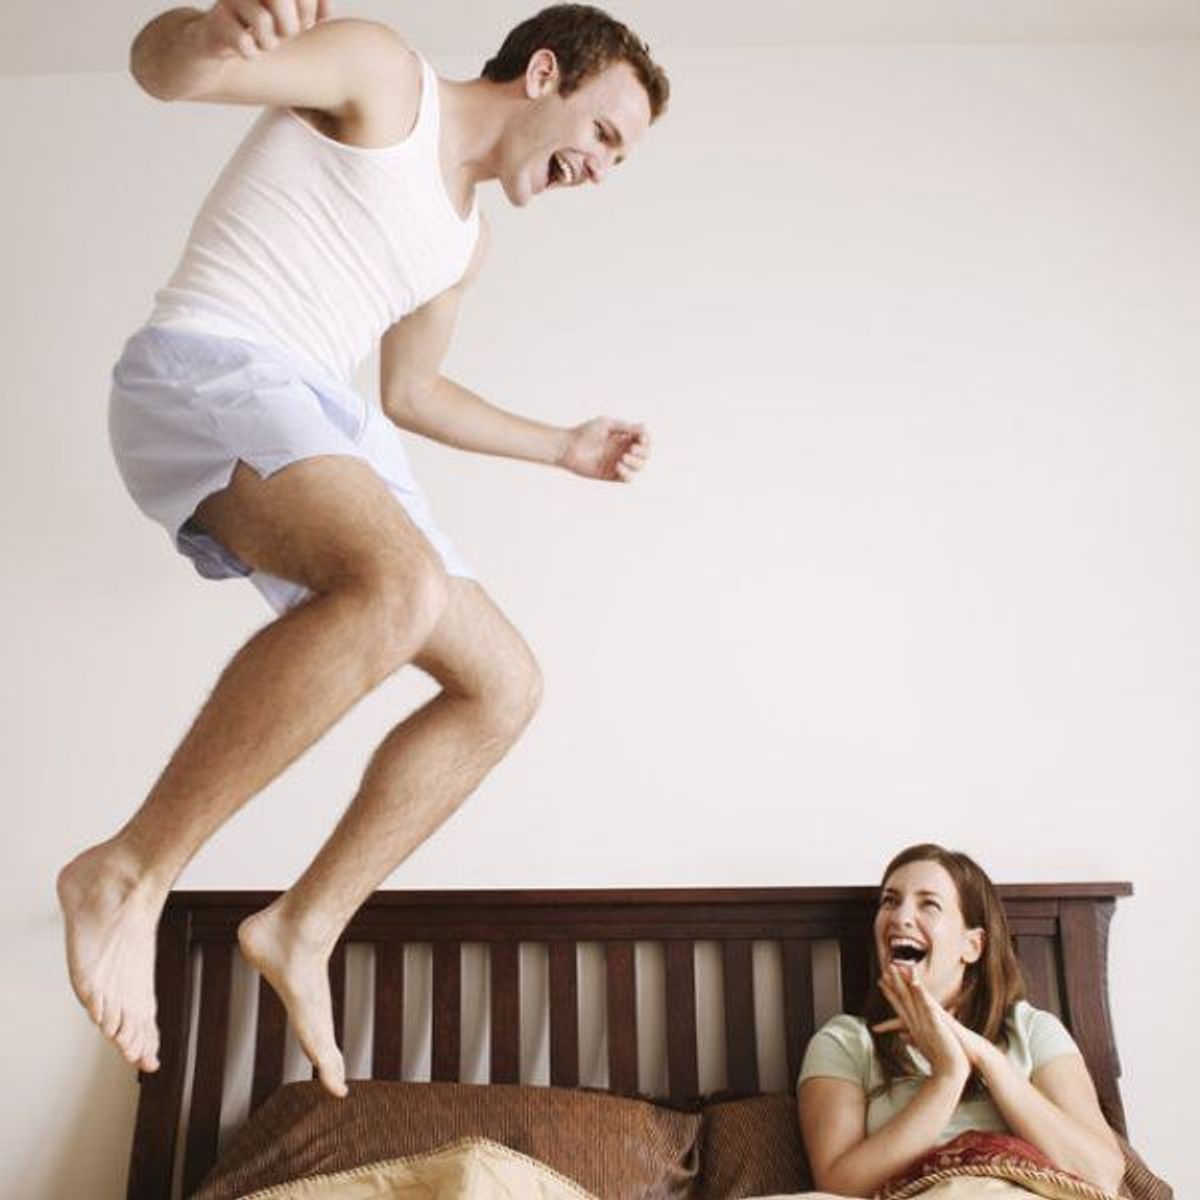 7 Things You Wish You Knew Before Moving In With Your Boyfriend